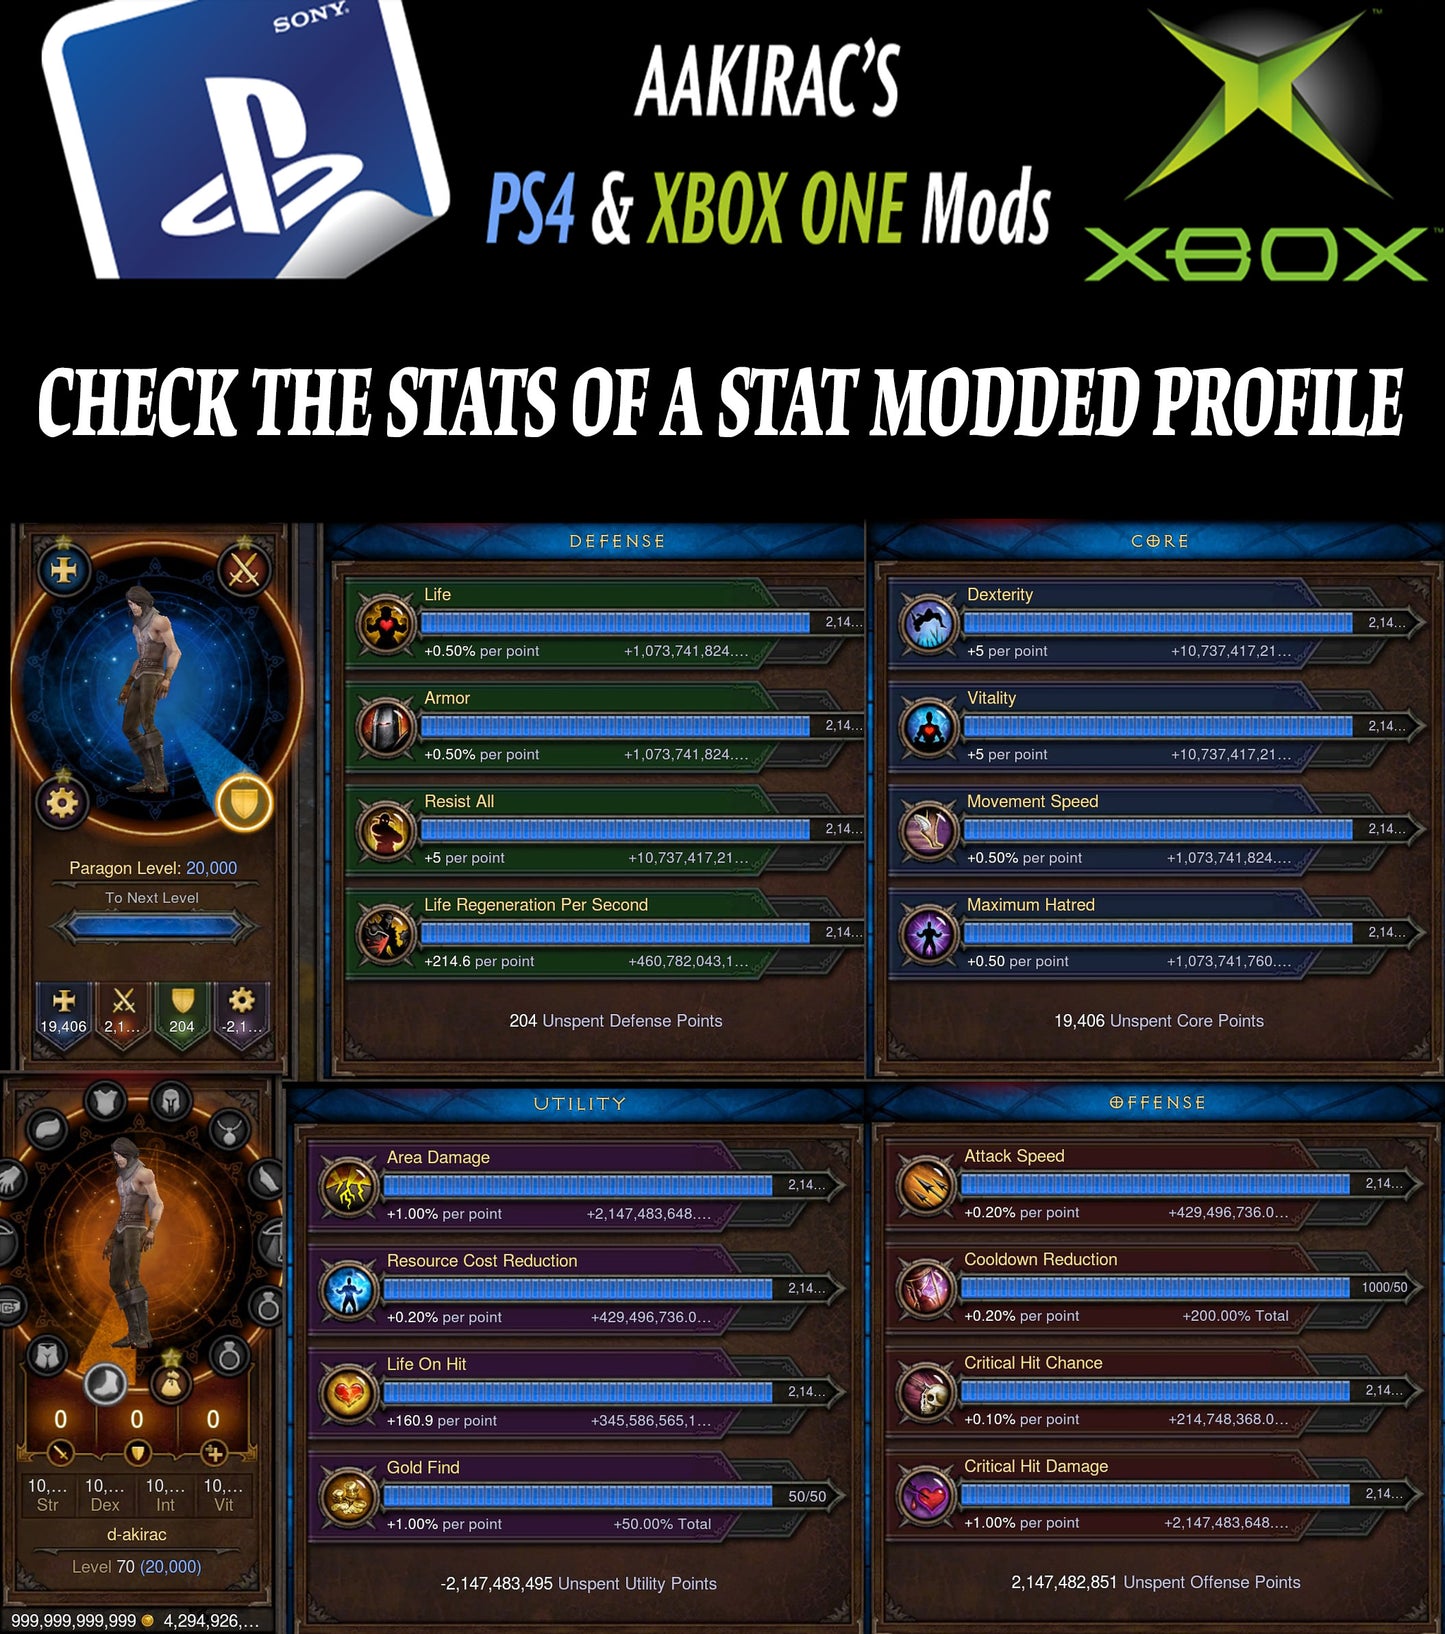 14x EXTREME Stat Modded Characters + Necromancer Stat Mod Diablo 3 Mods ROS Seasonal and Non Seasonal Save Mod - Modded Items and Gear - Hacks - Cheats - Trainers for Playstation 4 - Playstation 5 - Nintendo Switch - Xbox One